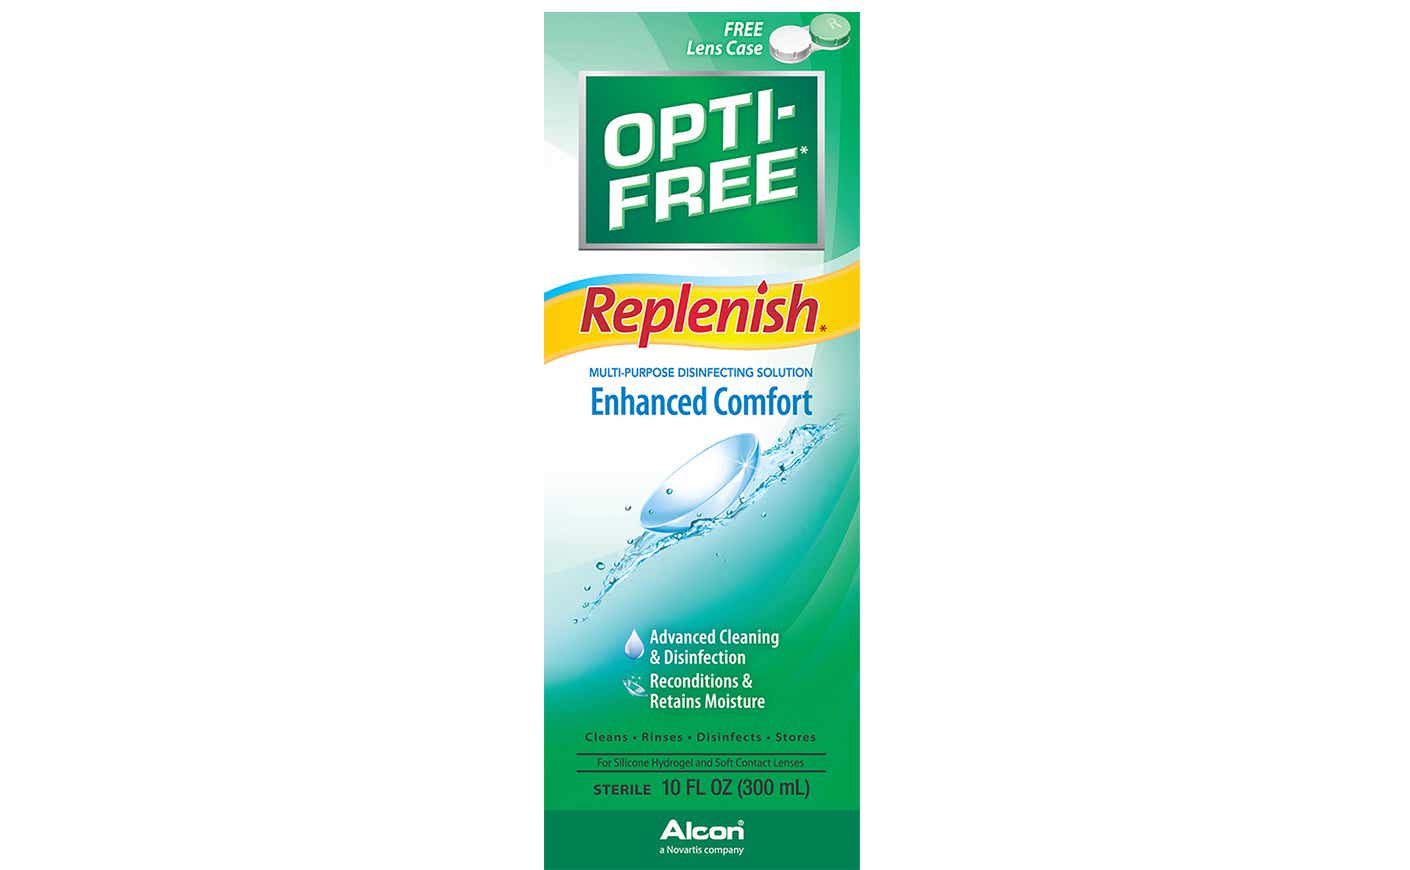 Opti free disinfecting solution